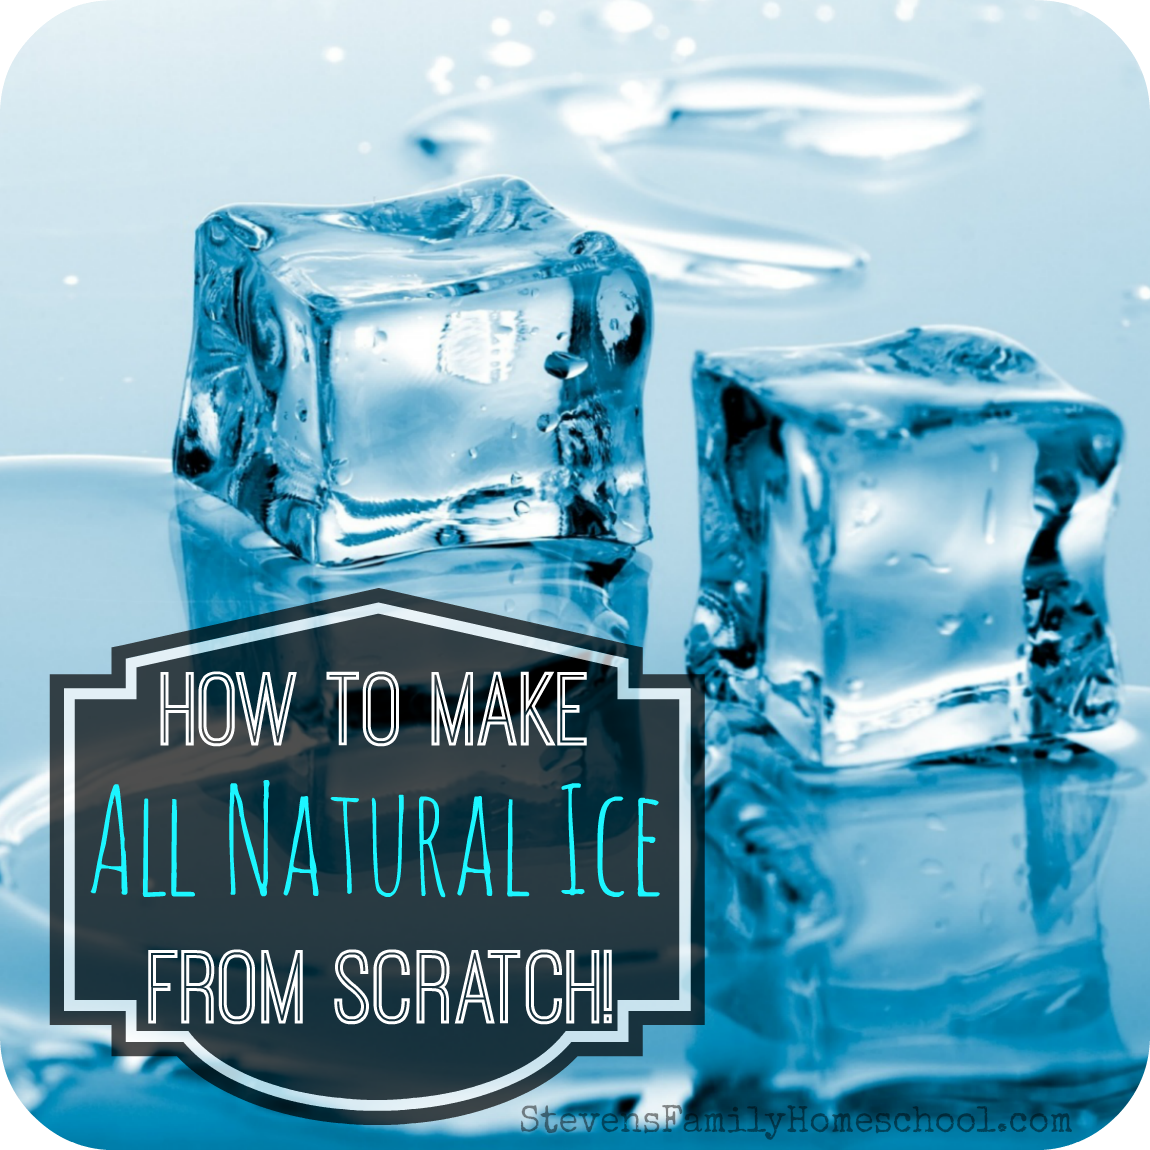 How to make All natural Ice from scratch!